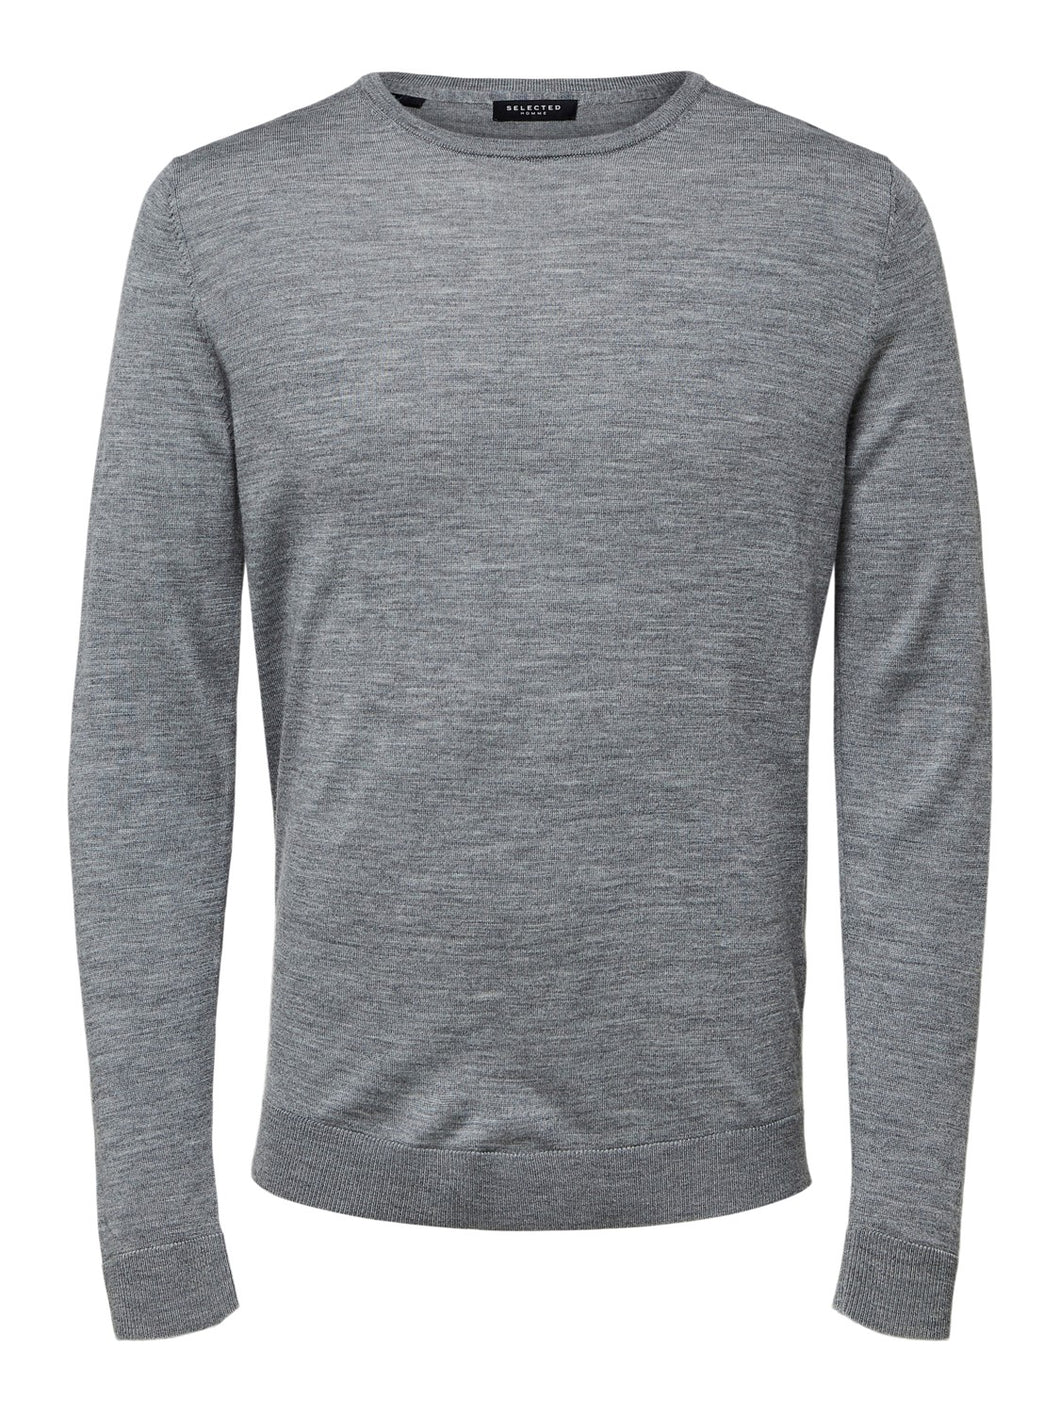 Selected Homme Tower Merino Knit Light Grey